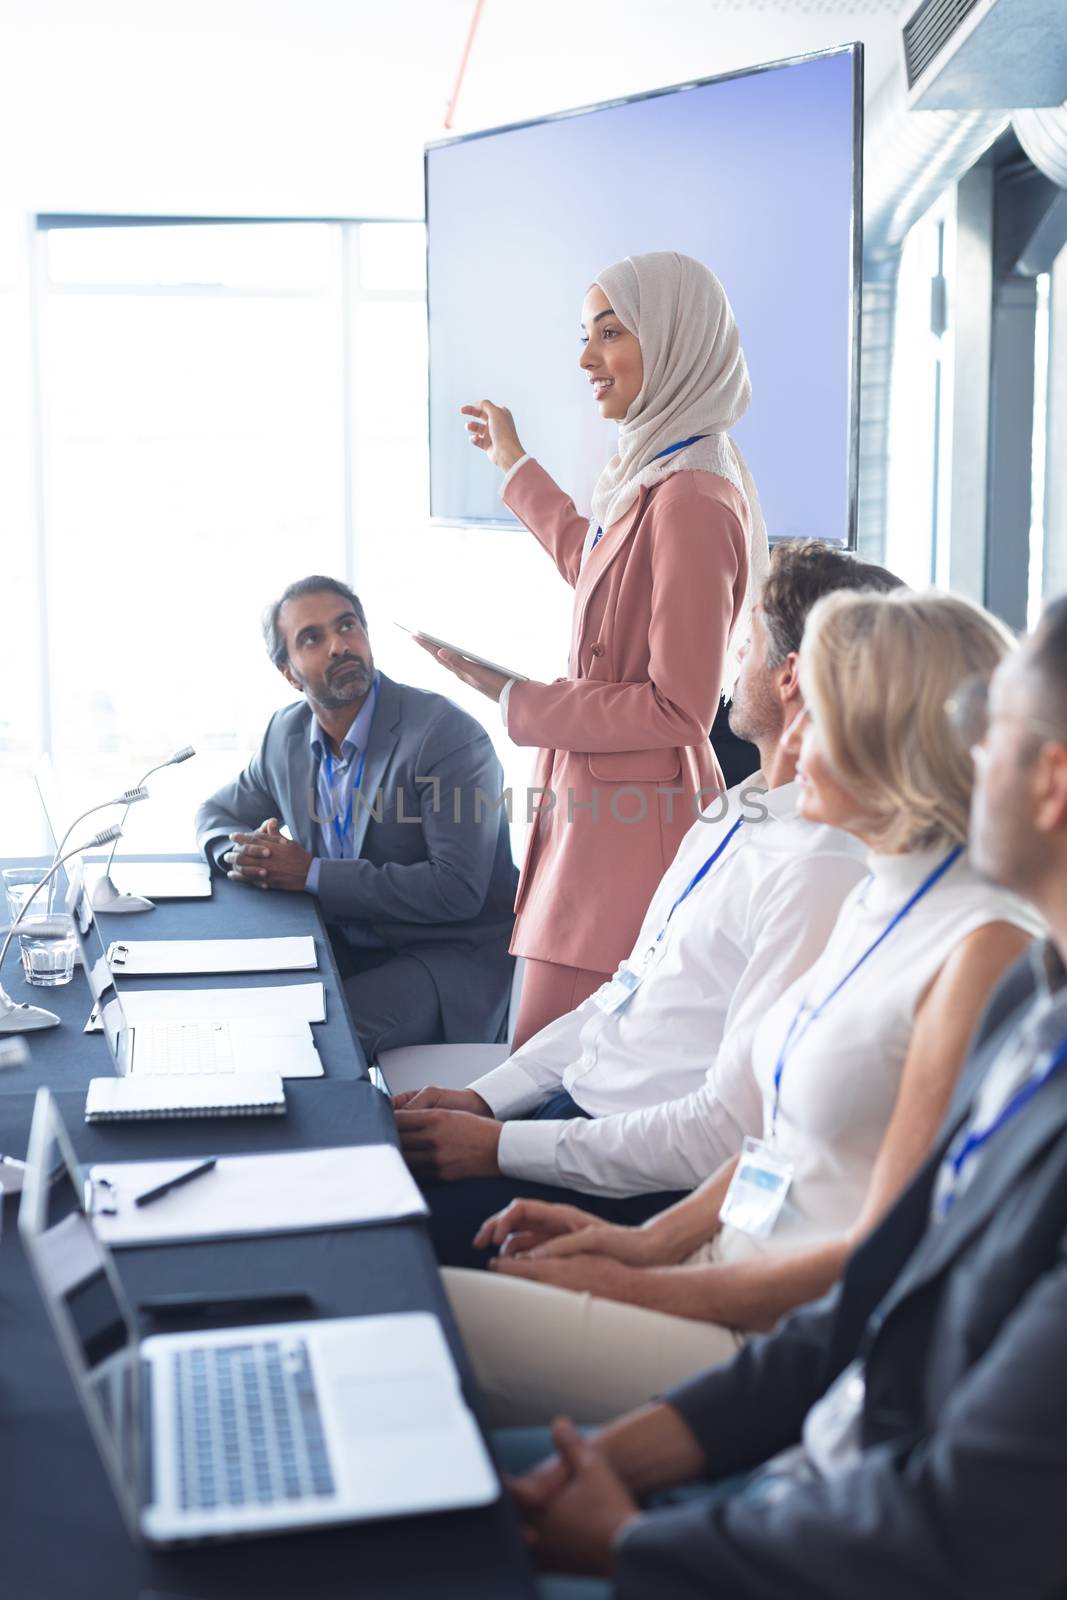 Side view of mixed race businesswoman in hijab giving presentation at table in business seminar. International diverse corporate business partnership concept